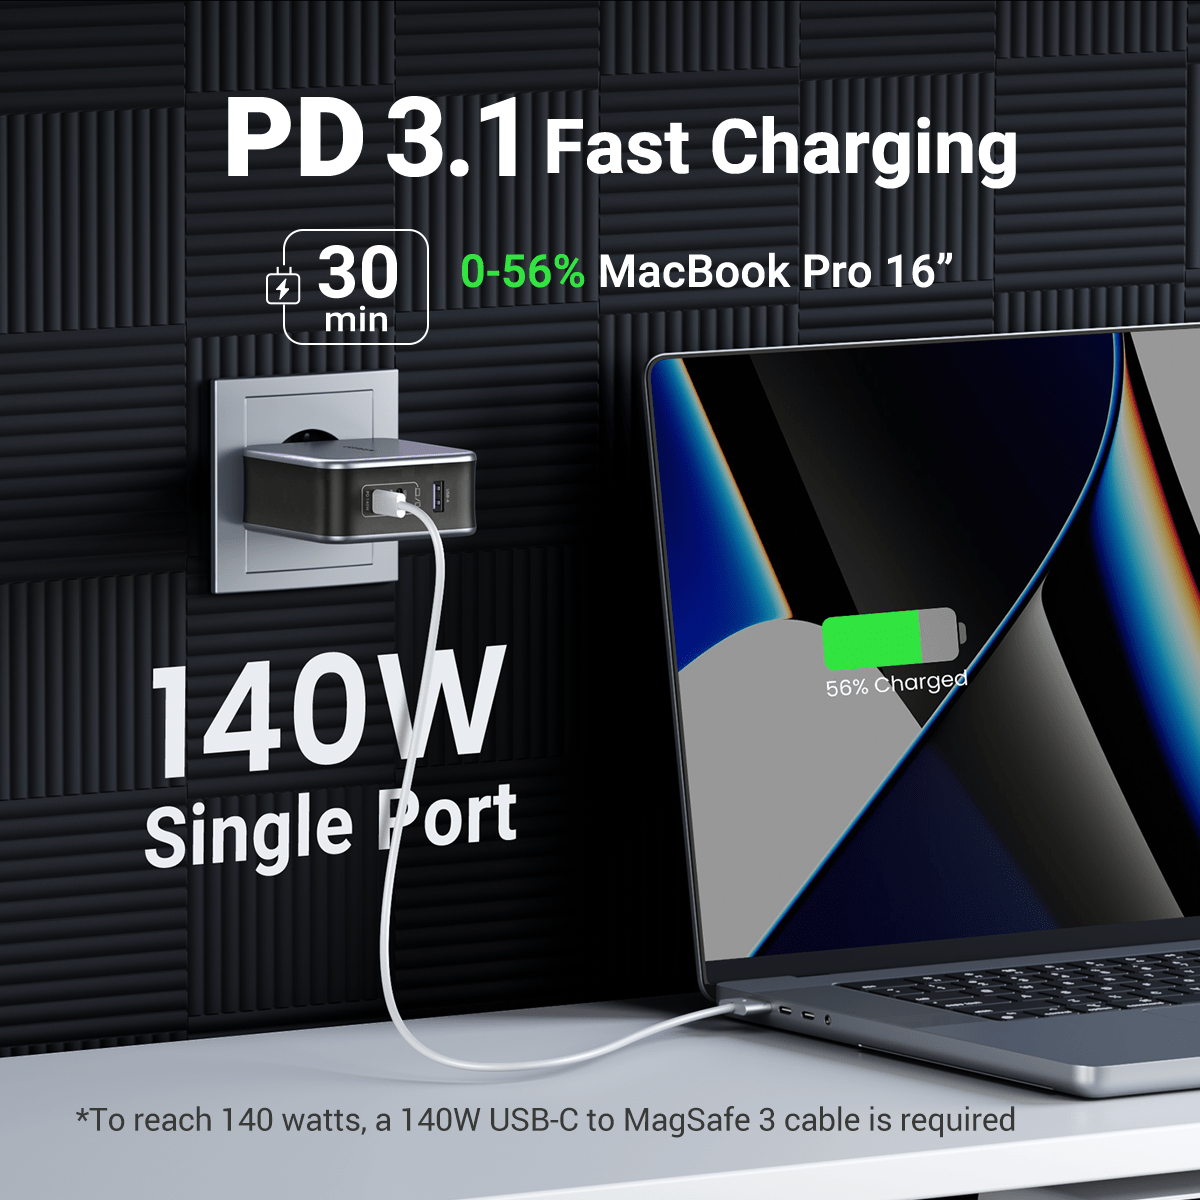 UGREEN 140W USB C Charger, Mac Book Pro Charger Foldable Nexode PD3.1 PPS  3-Port Fast GaN Laptop Wall Charger Power Adapter for MacBook Pro 16'',  Dell